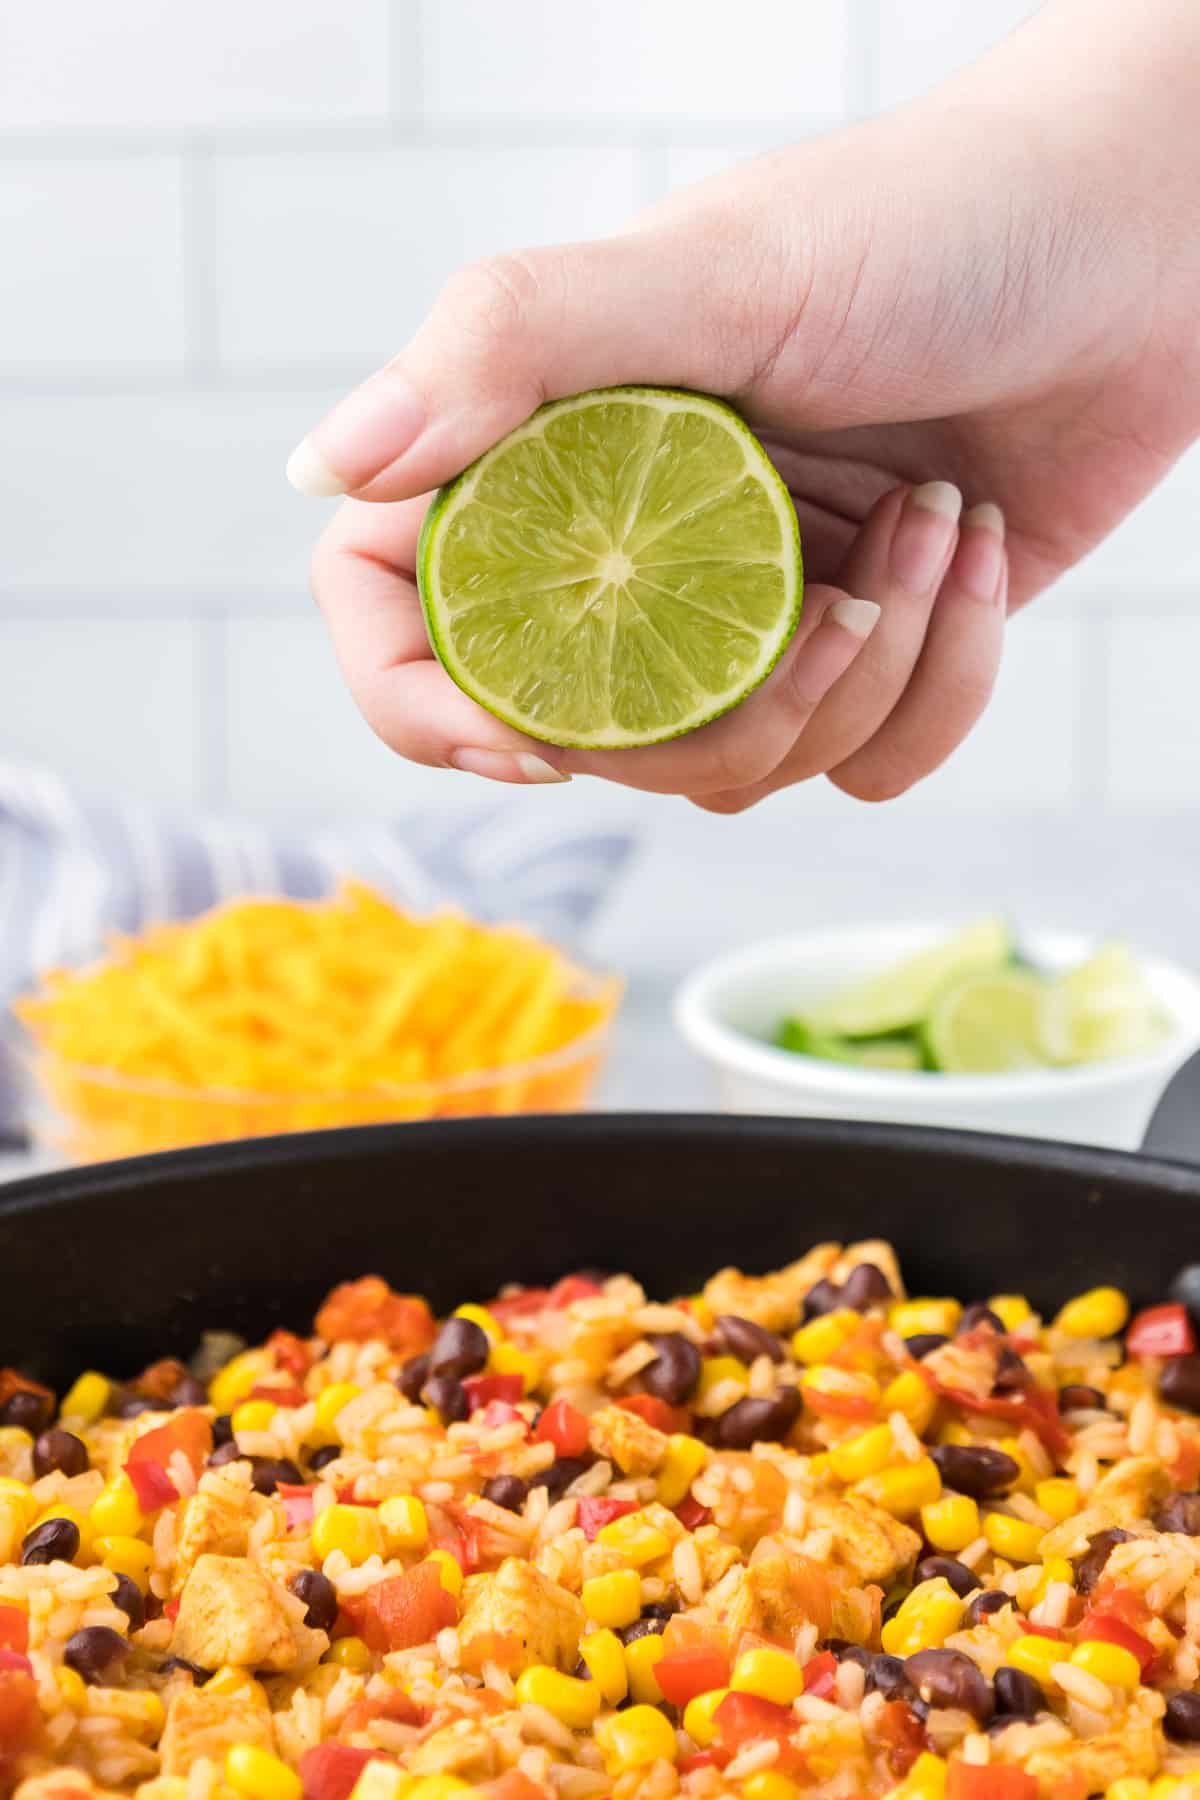 A person holding a lime squeezing it over a pan of Mexican chicken and rice.